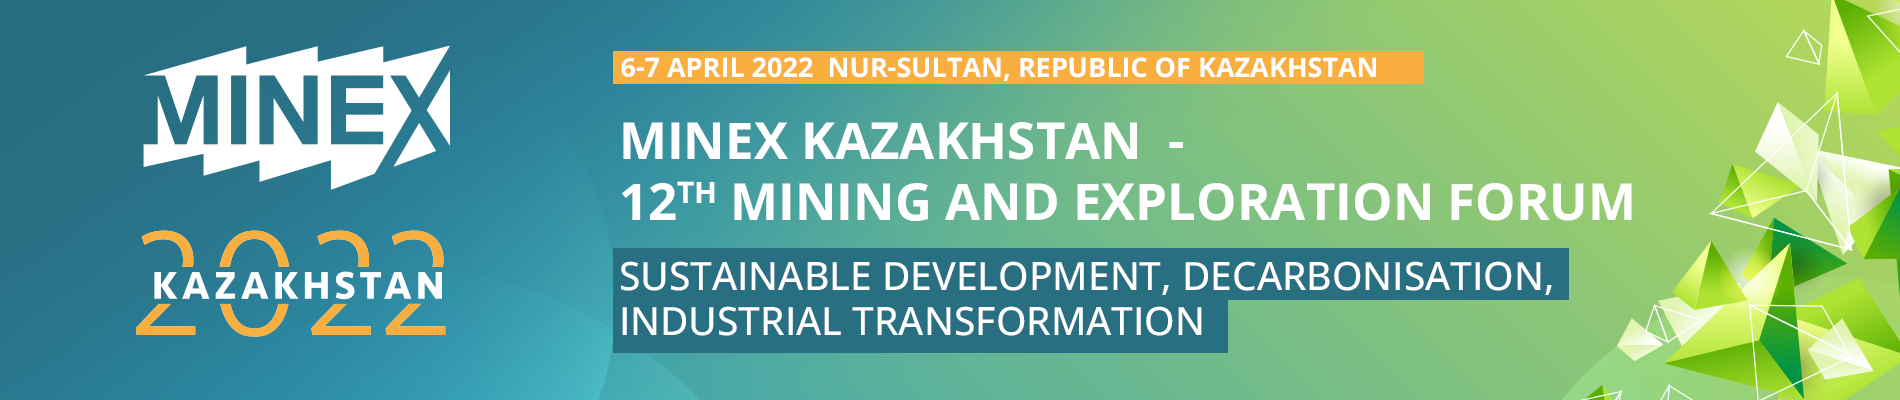 On 6 April, the 12th International Mining and Geological Forum MINEX Kazakhstan 2022 launches in Nur-Sultan